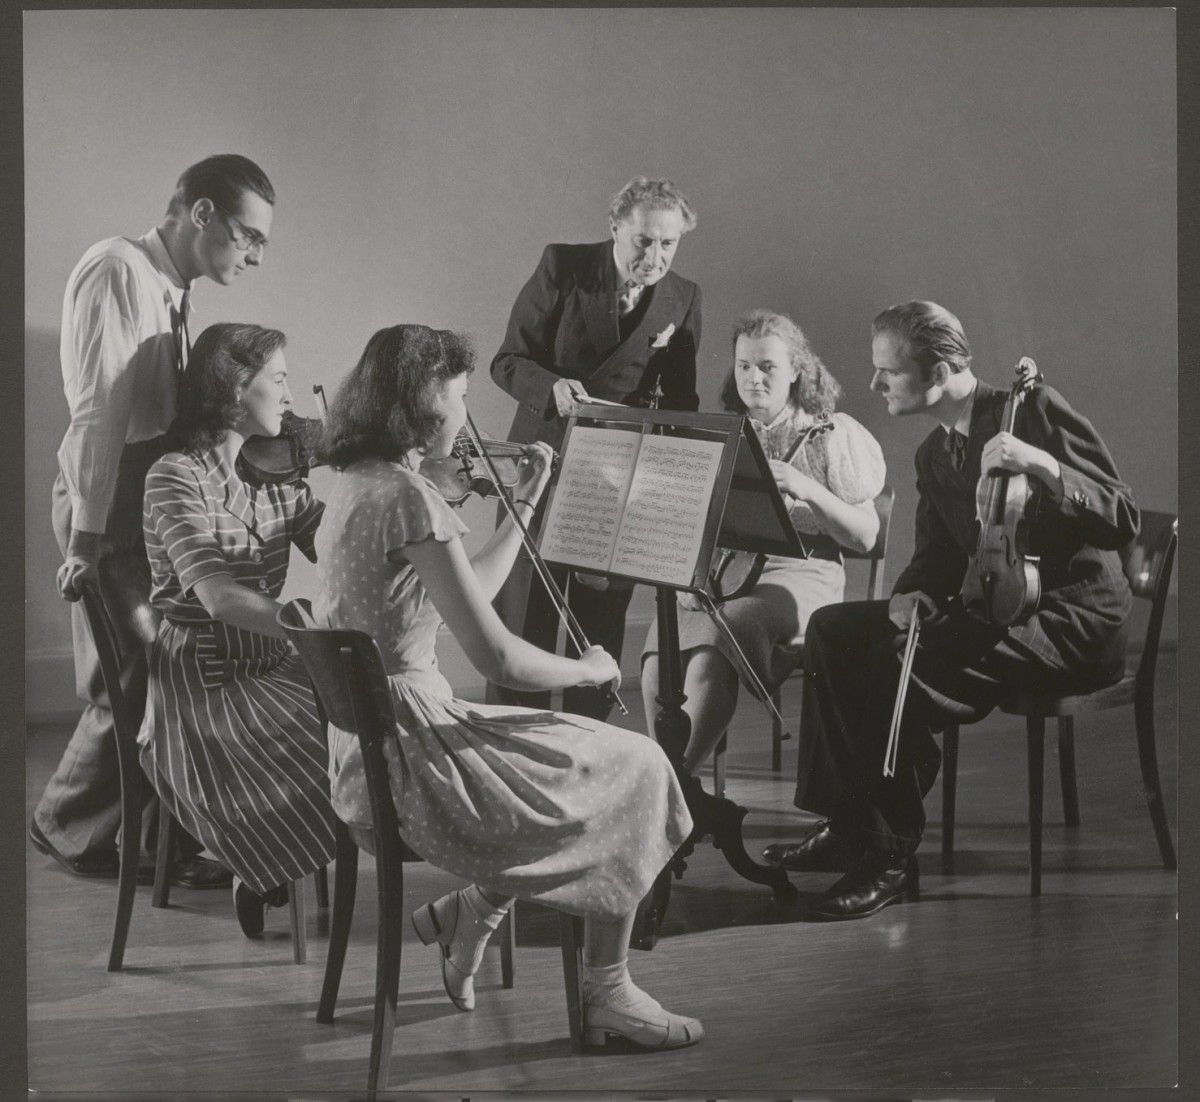 Chamber music lessons 1950